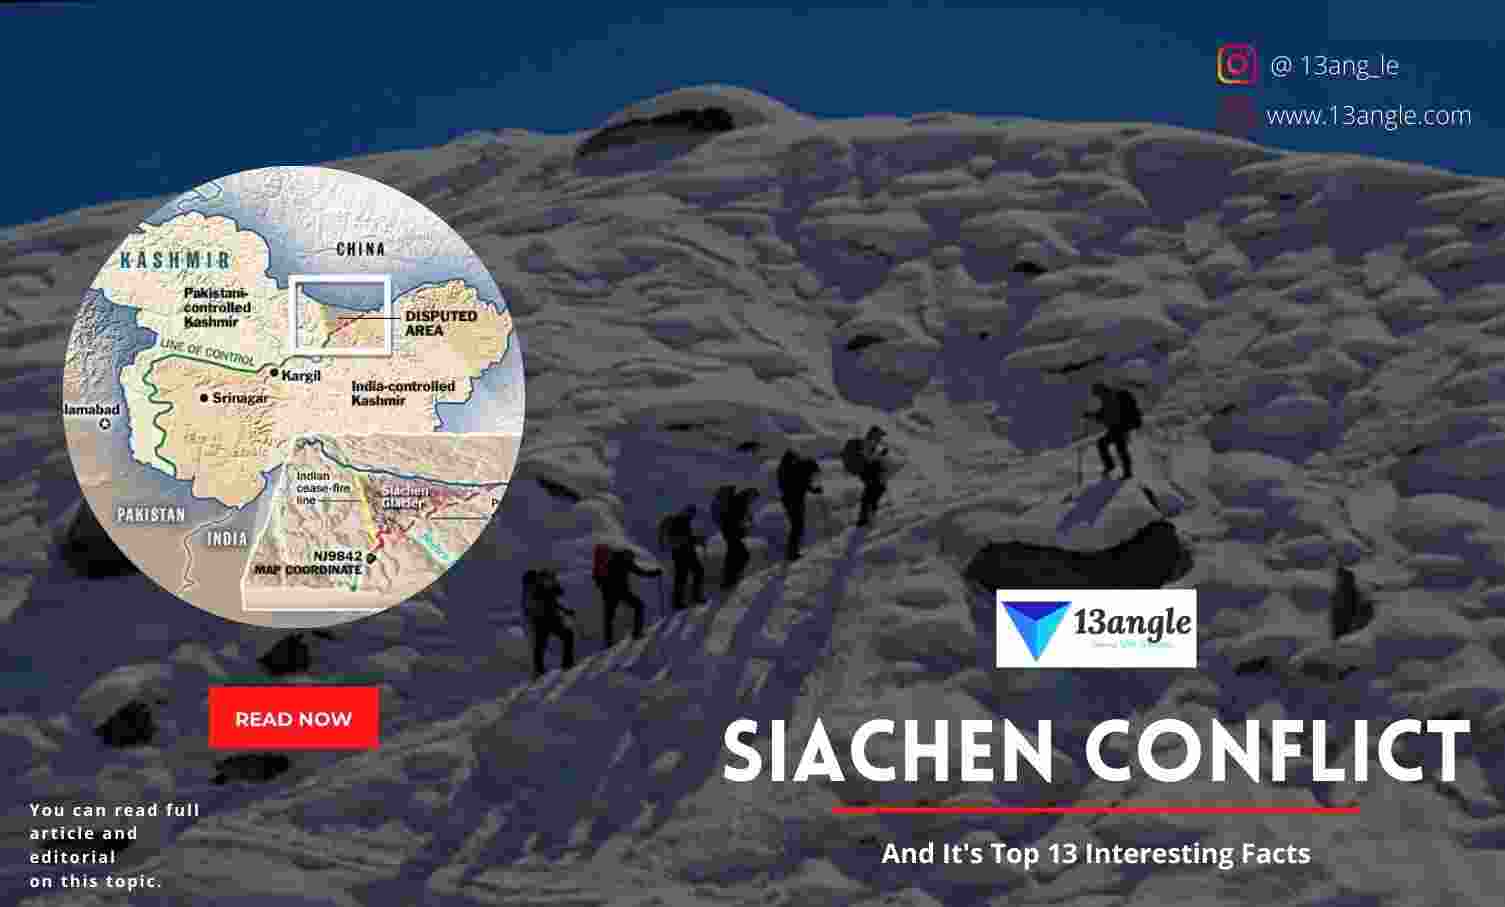 Siachen Conflict And It's Top 13 Interesting Facts- 13angle.com